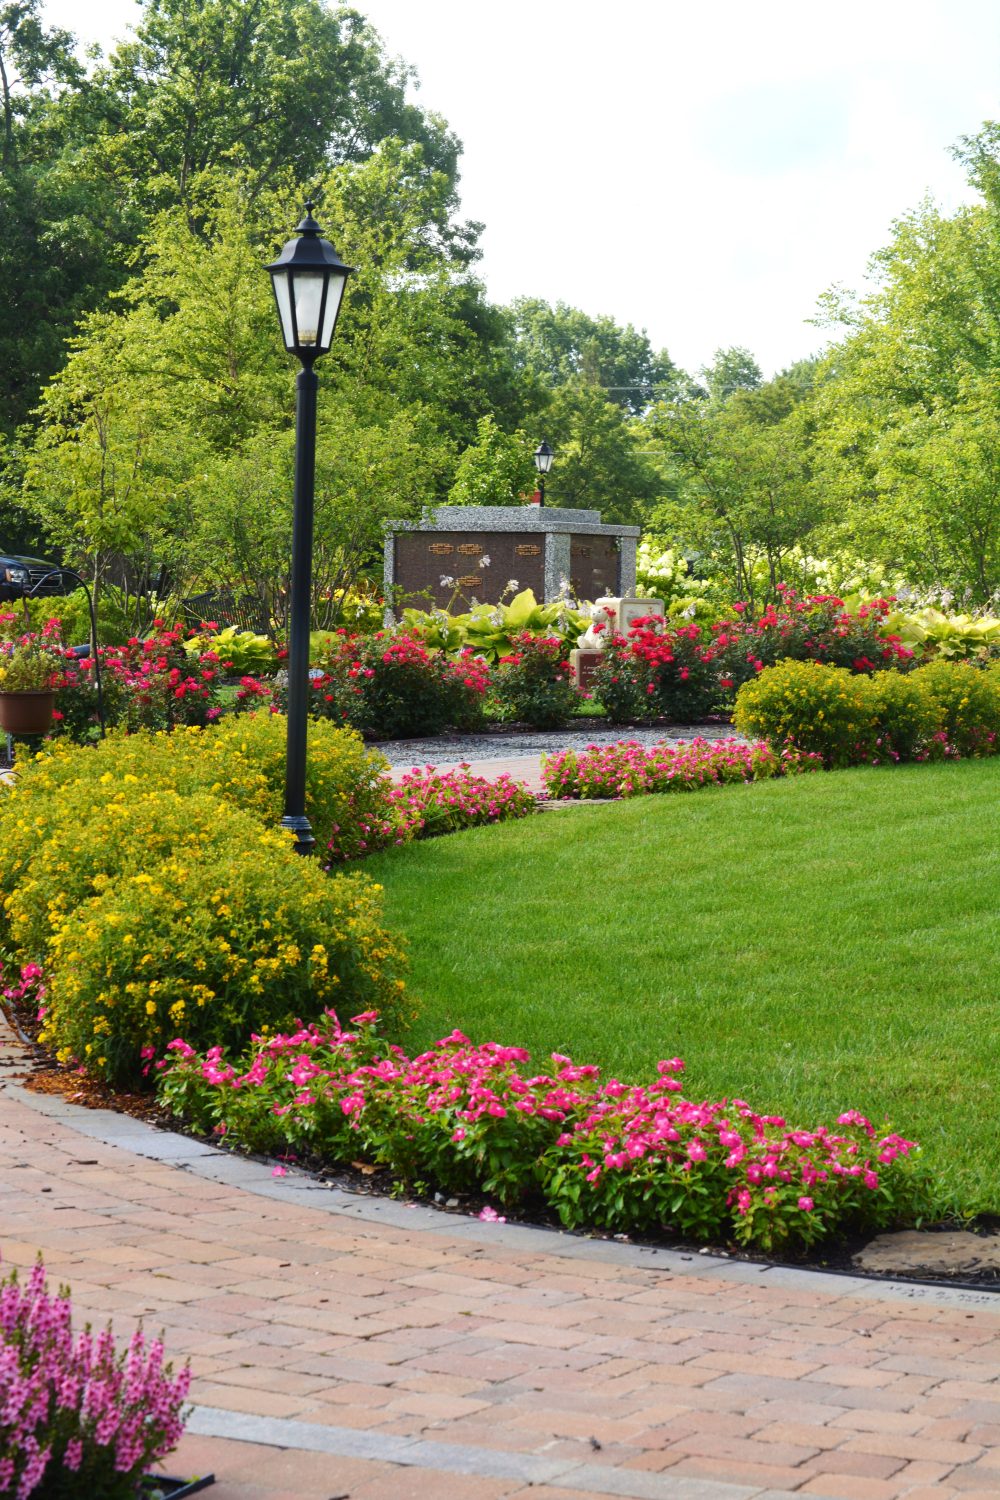 Brick walkway surrounded by planted flowers